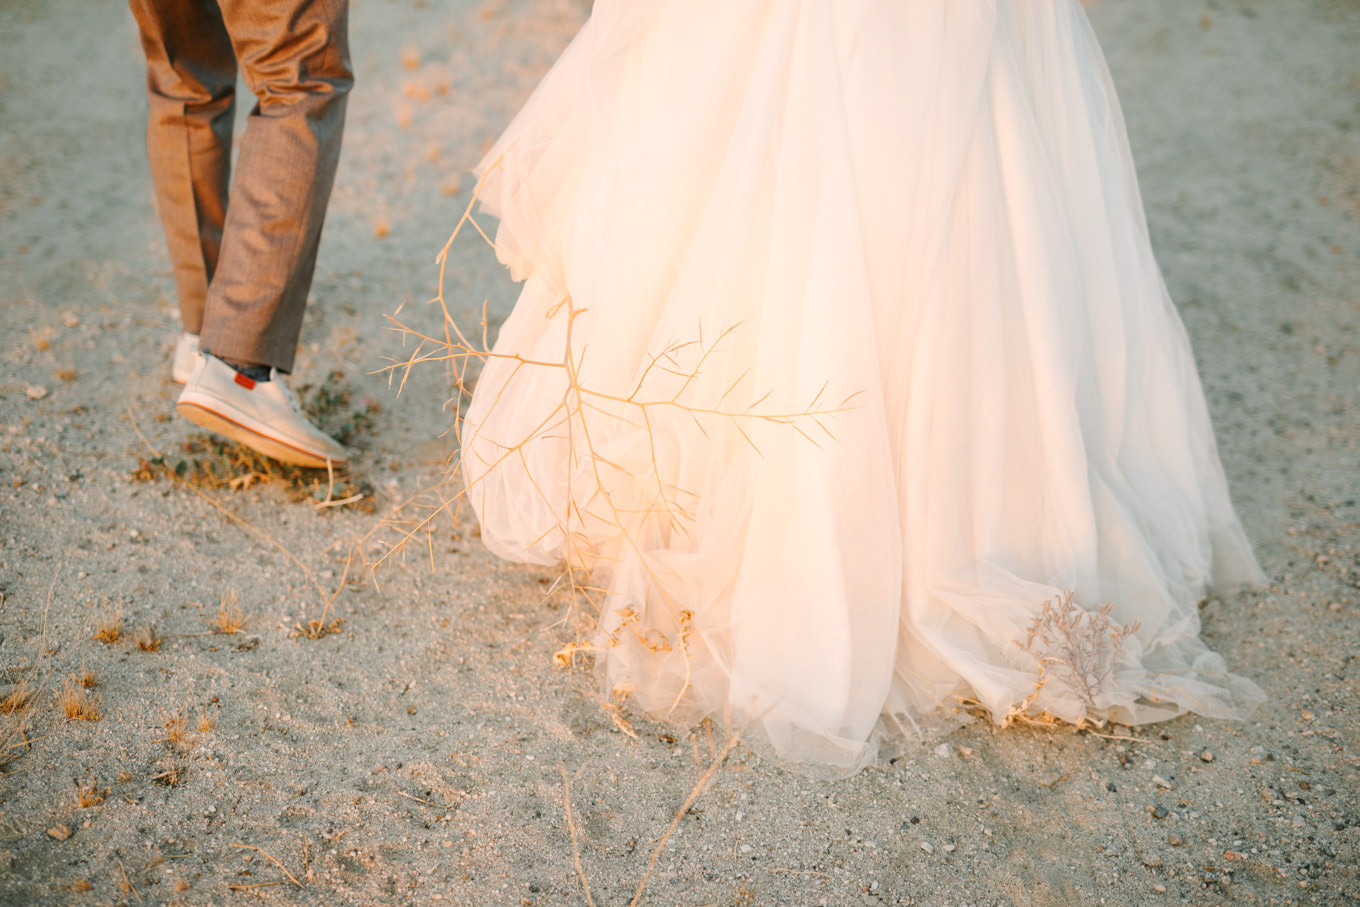 Tumbleweed stuck to bride's dress | Pink and orange Lautner Compound wedding | Colorful Palm Springs wedding photography | #palmspringsphotographer #palmspringswedding #lautnercompound #southerncaliforniawedding  Source: Mary Costa Photography | Los Angeles